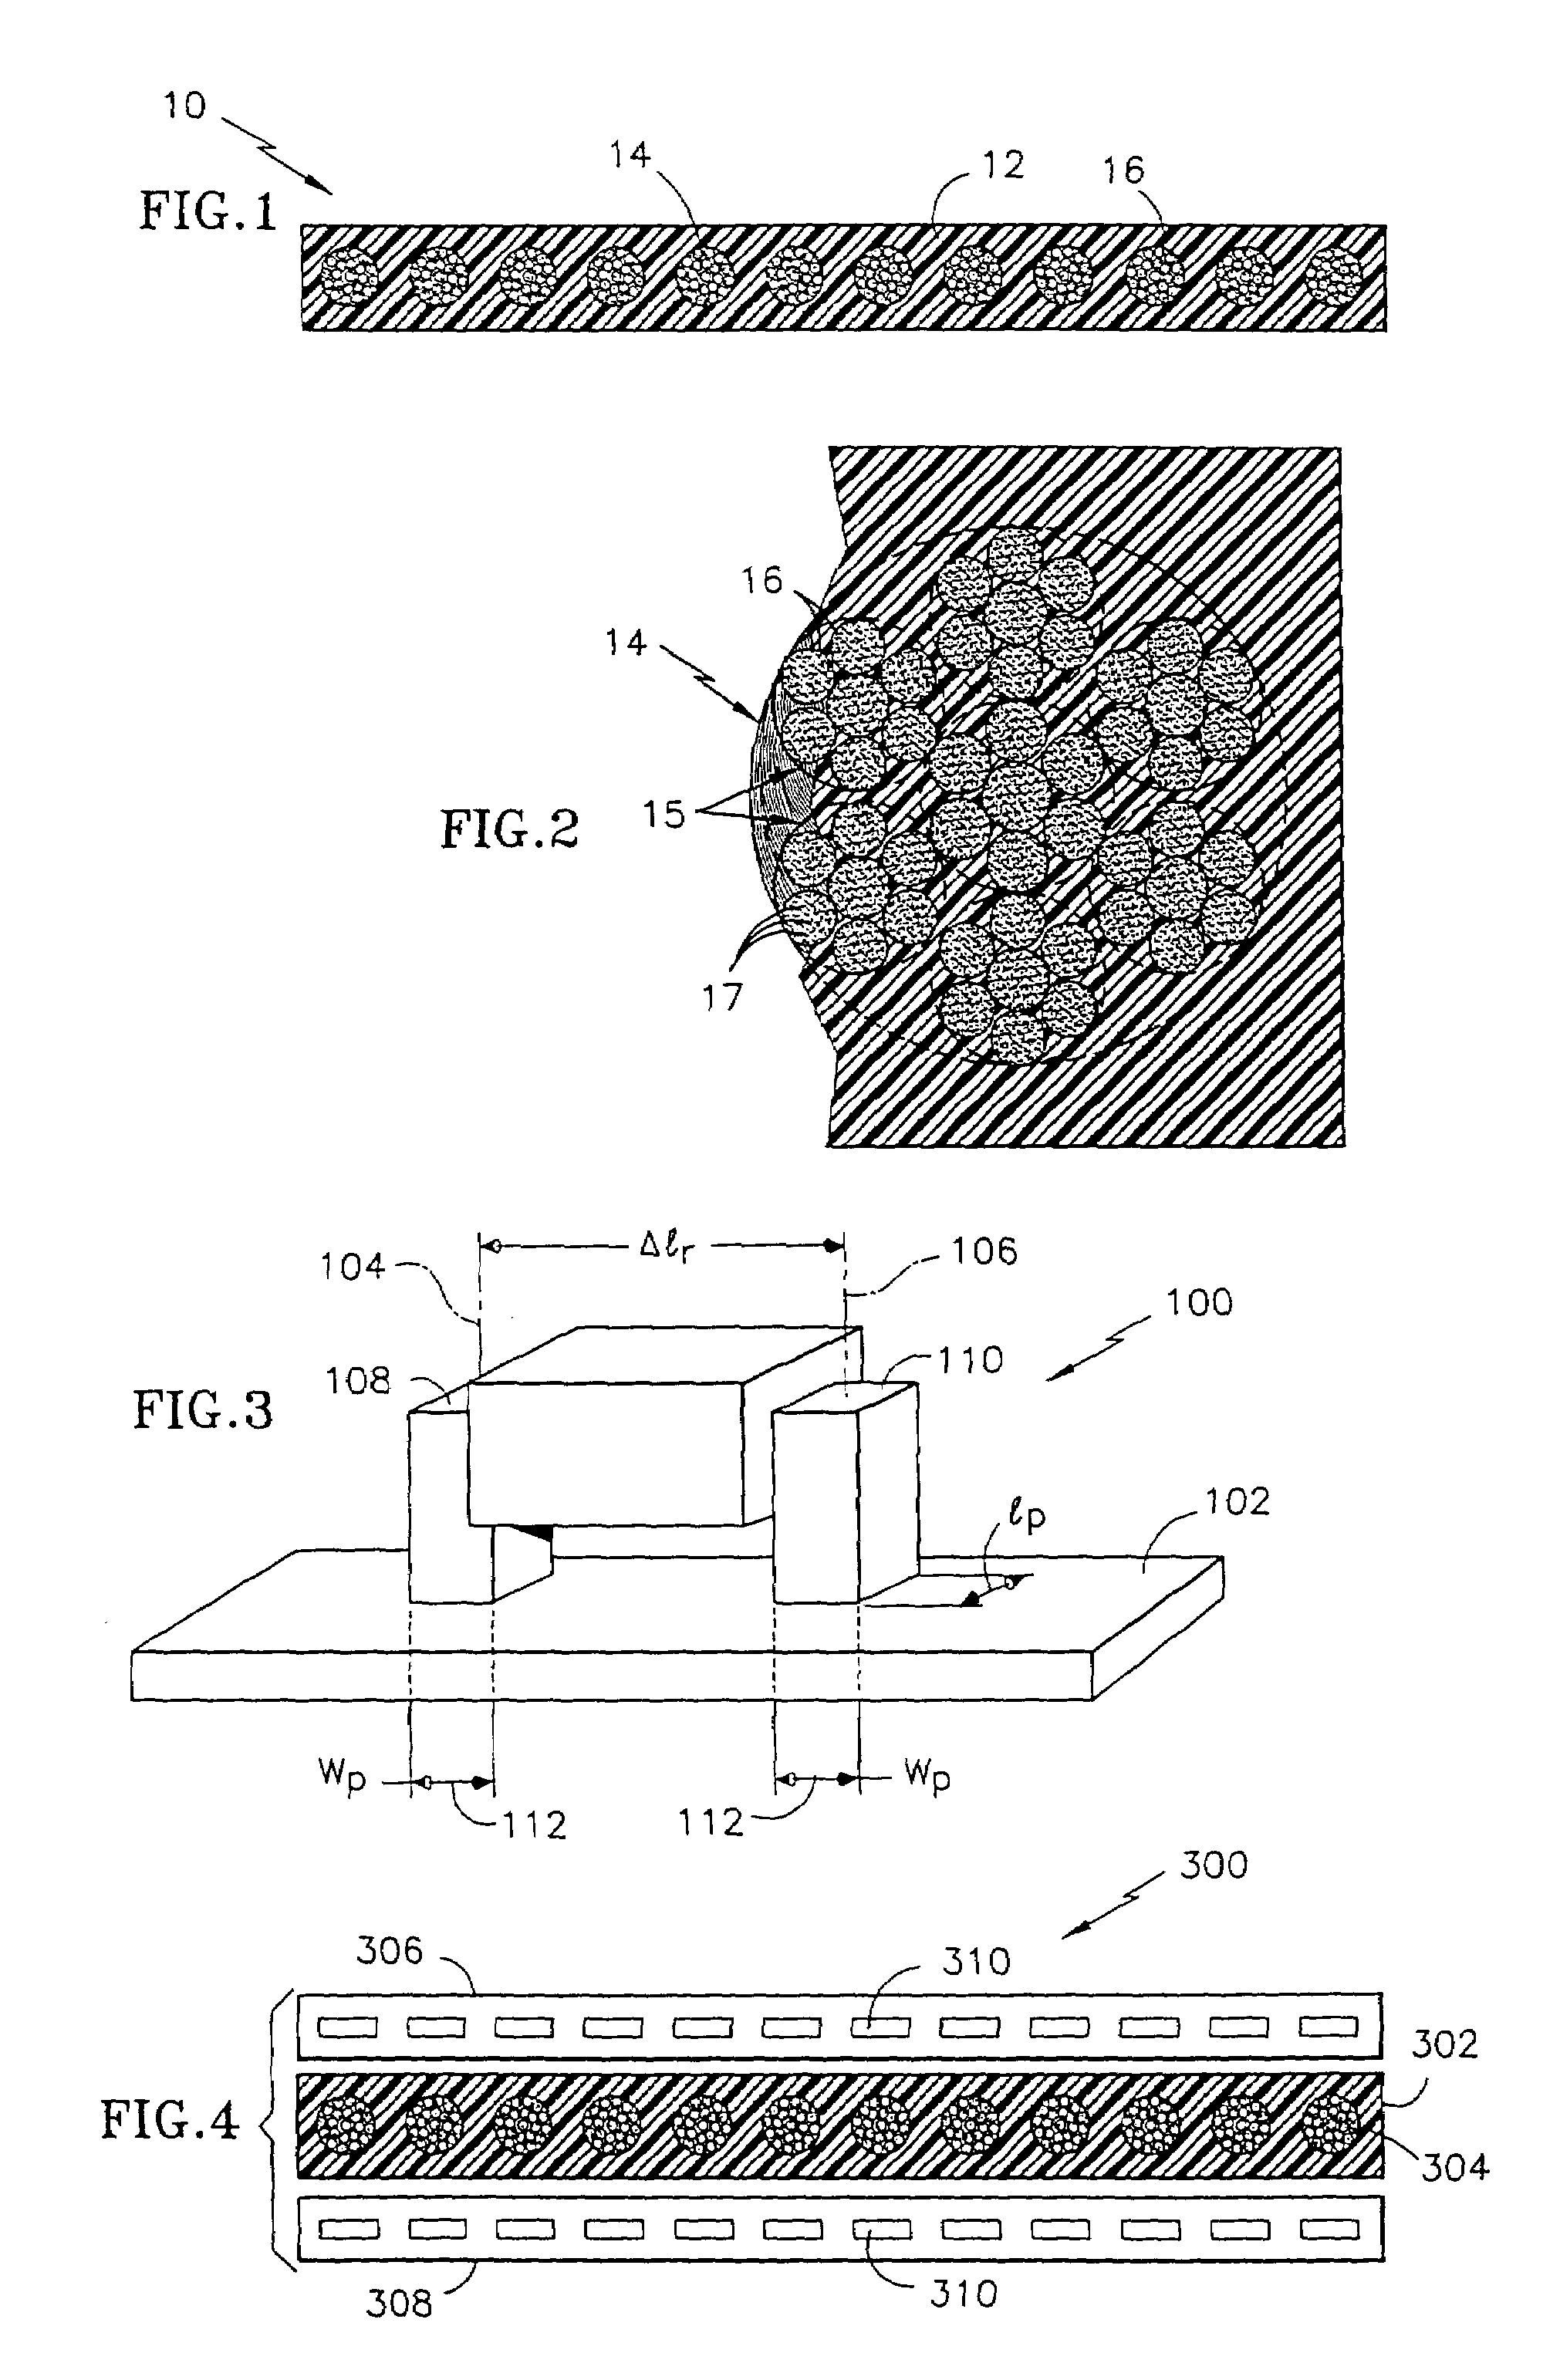 Method and apparatus for detecting elevator rope degradation using electrical resistance